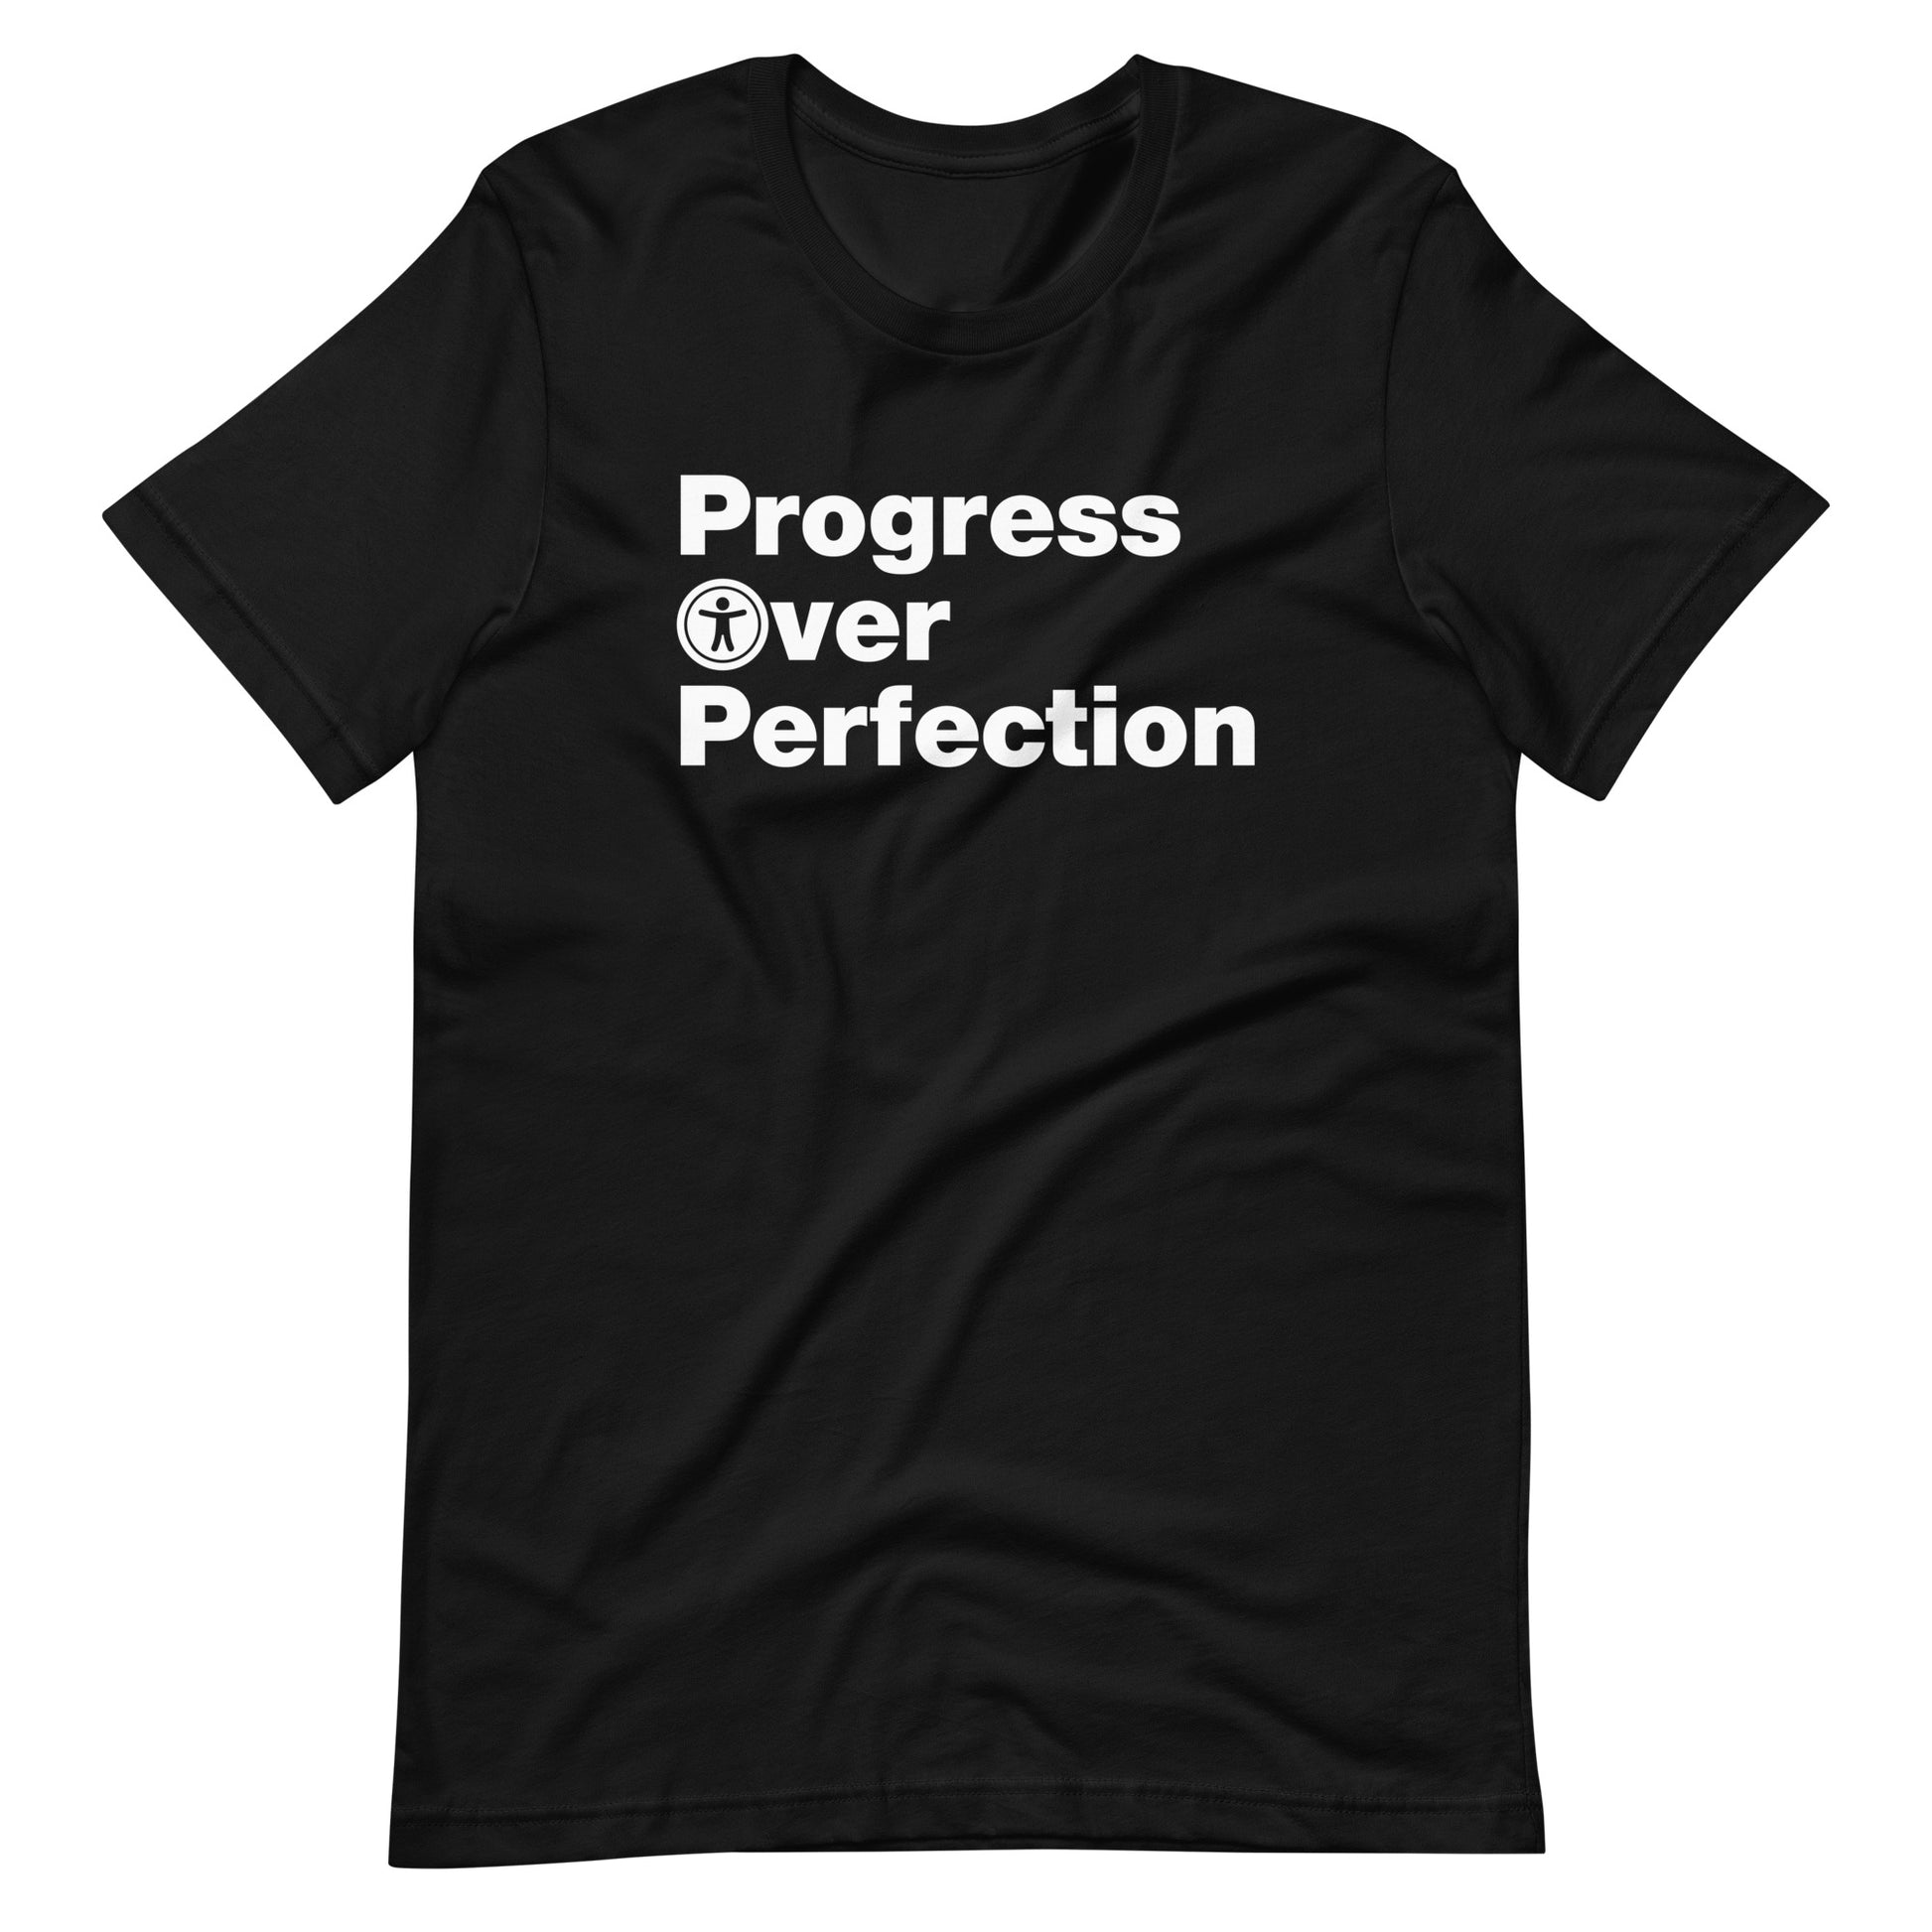 White, Progress Over Perfection, words, stacked, left aligned. 'O' in Over is round universal icon, on front of black t-shirt.